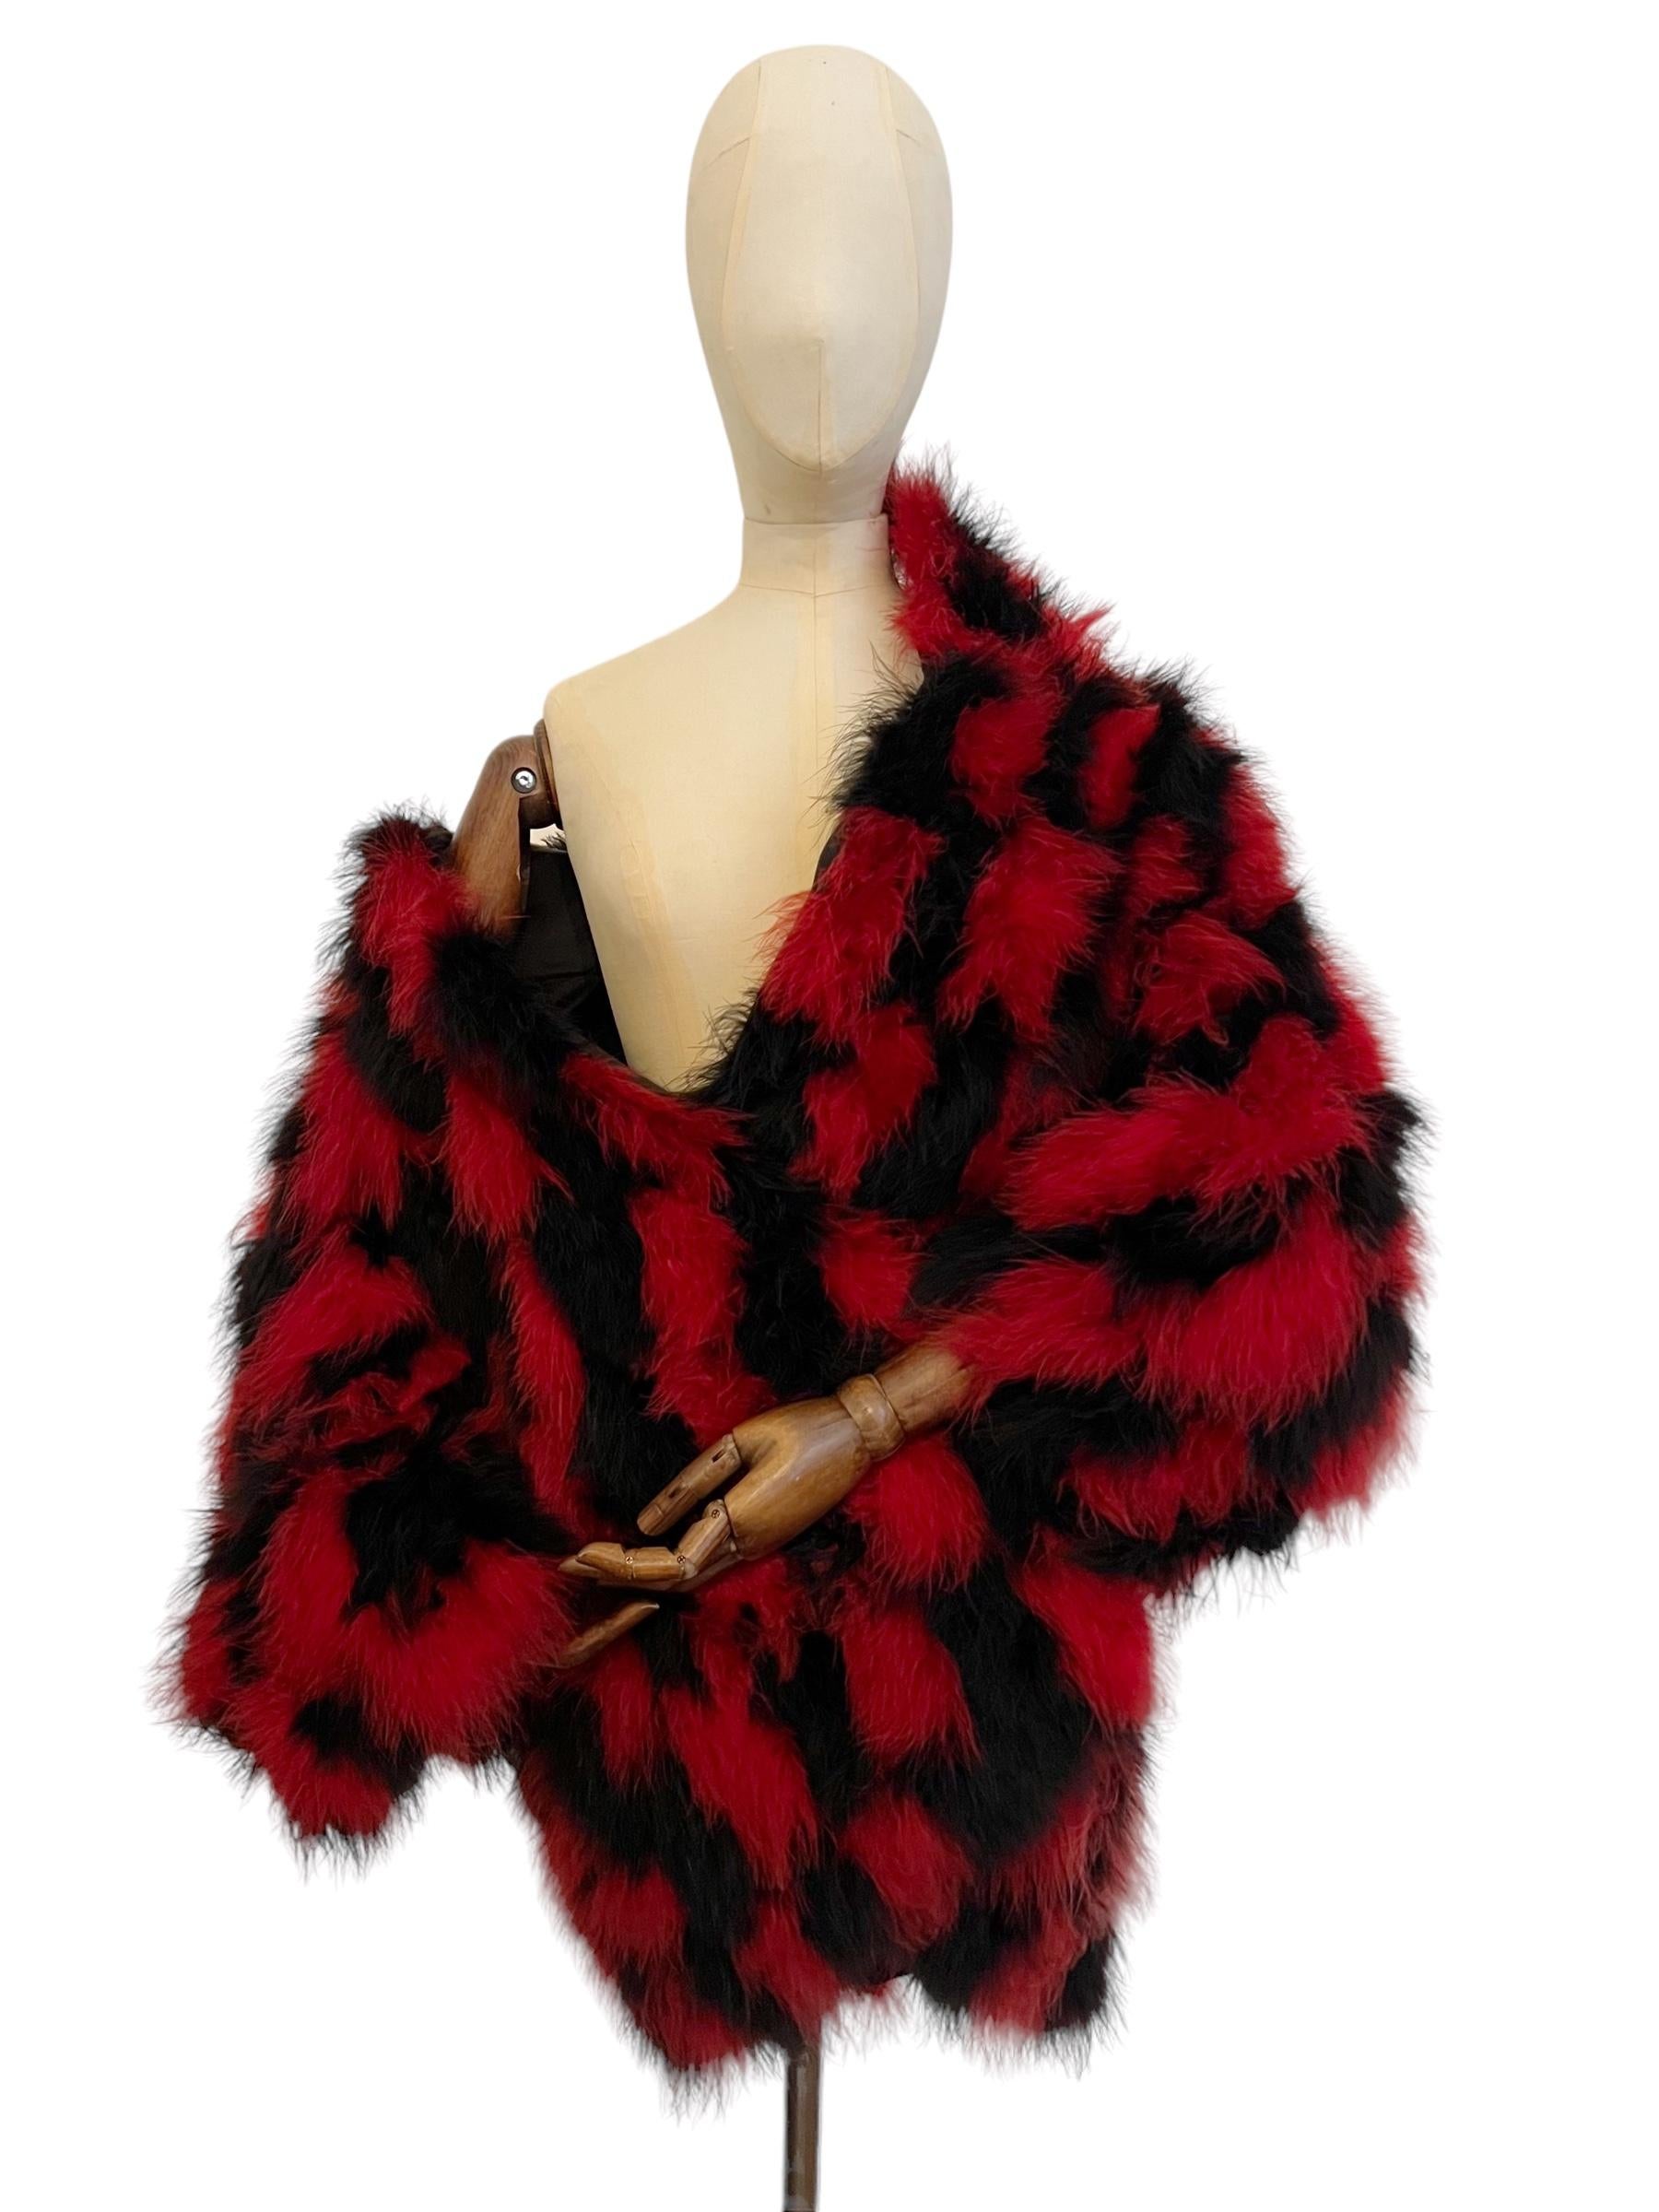 Decadent Vintage Christian Dior Jacket circa 1970.

An Elegant Red and Black Check board pattern, Oversized Marabou feather Jacket.

Featuring long sleeves, full black interior lining, outer hip pockets and single central line farrier hook fasten